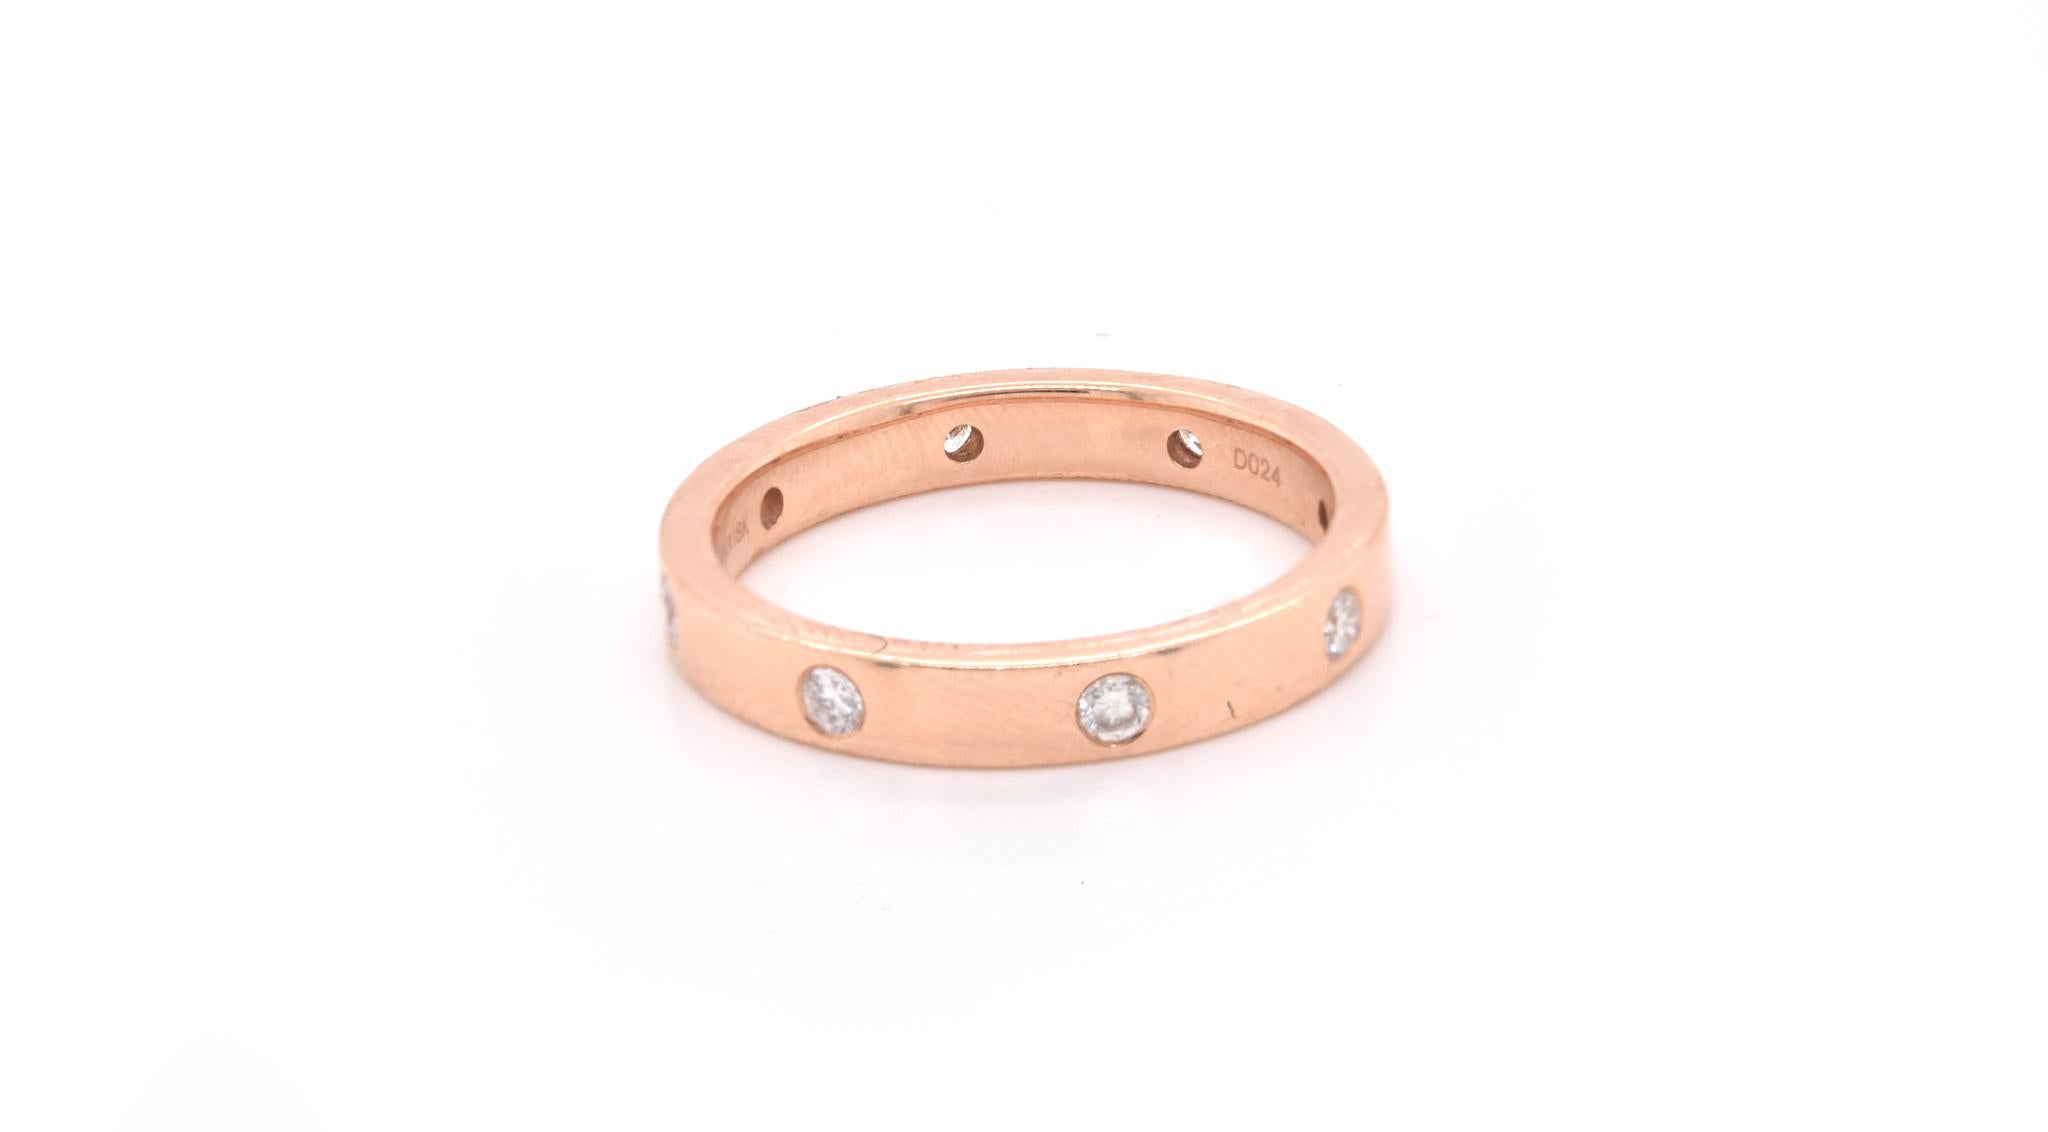 Material: 18k rose gold
Diamonds:  8 round brilliant cut= .20cttw
Color: G
Clarity: VS
Size: 6.5 please allow two additional shipping days for sizing requests)
Dimensions: ring is 3.16mm wide
Weight: 4.09 grams

